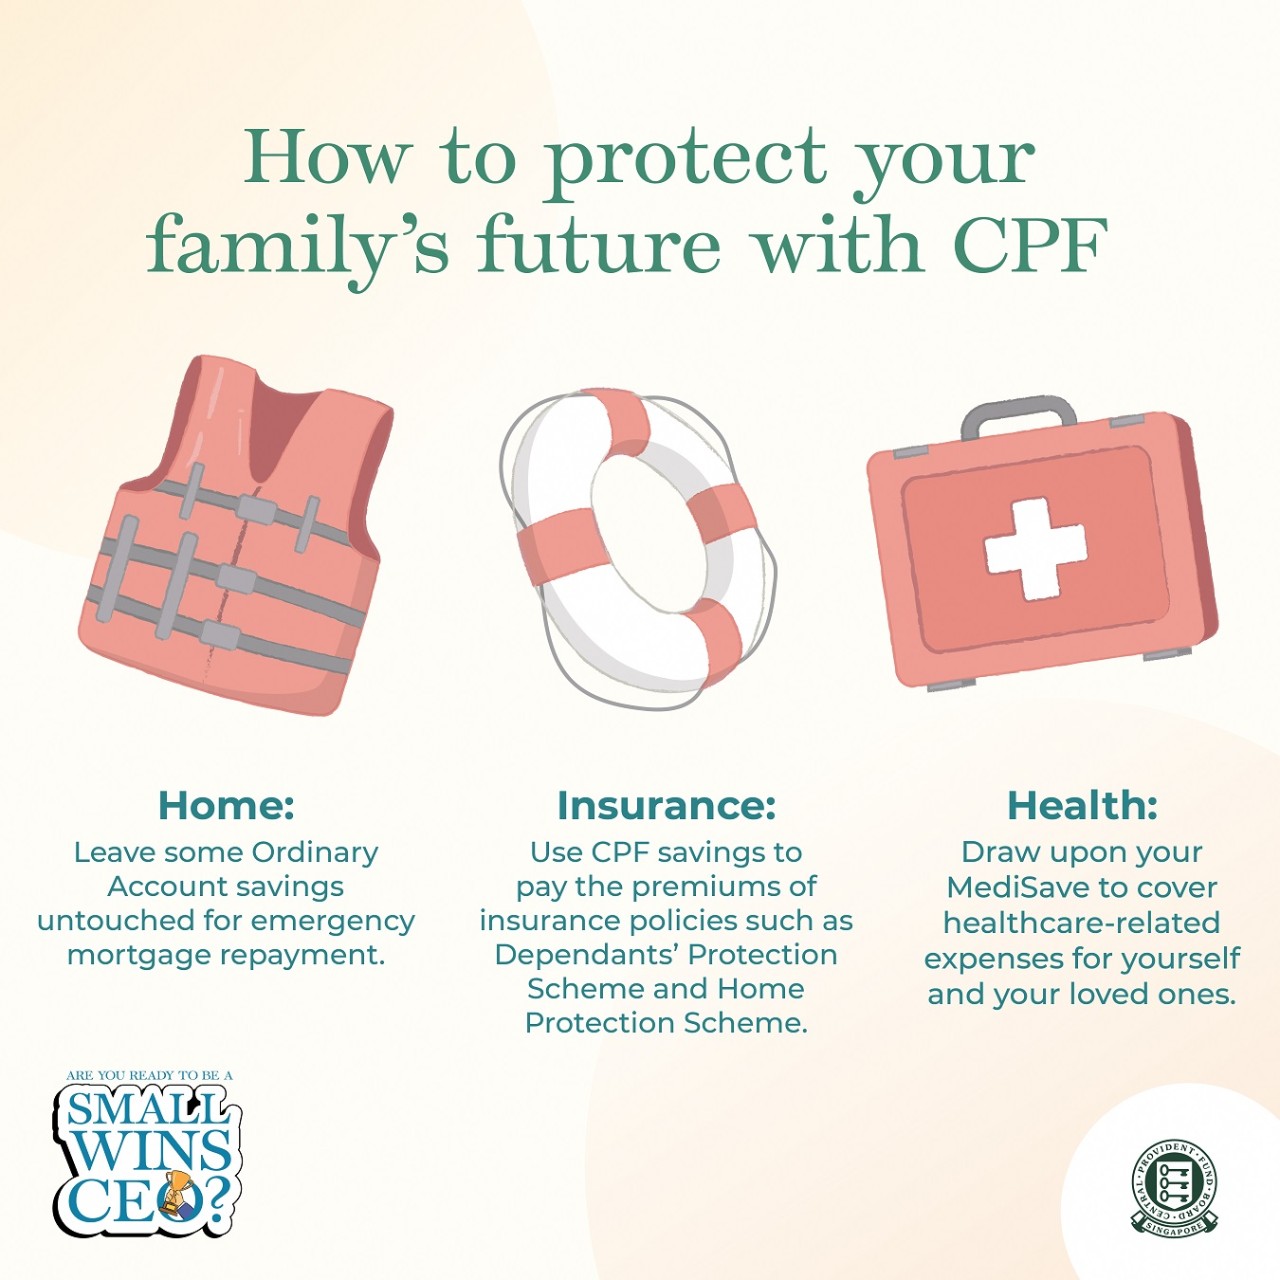 How to protect your family's future with CPF